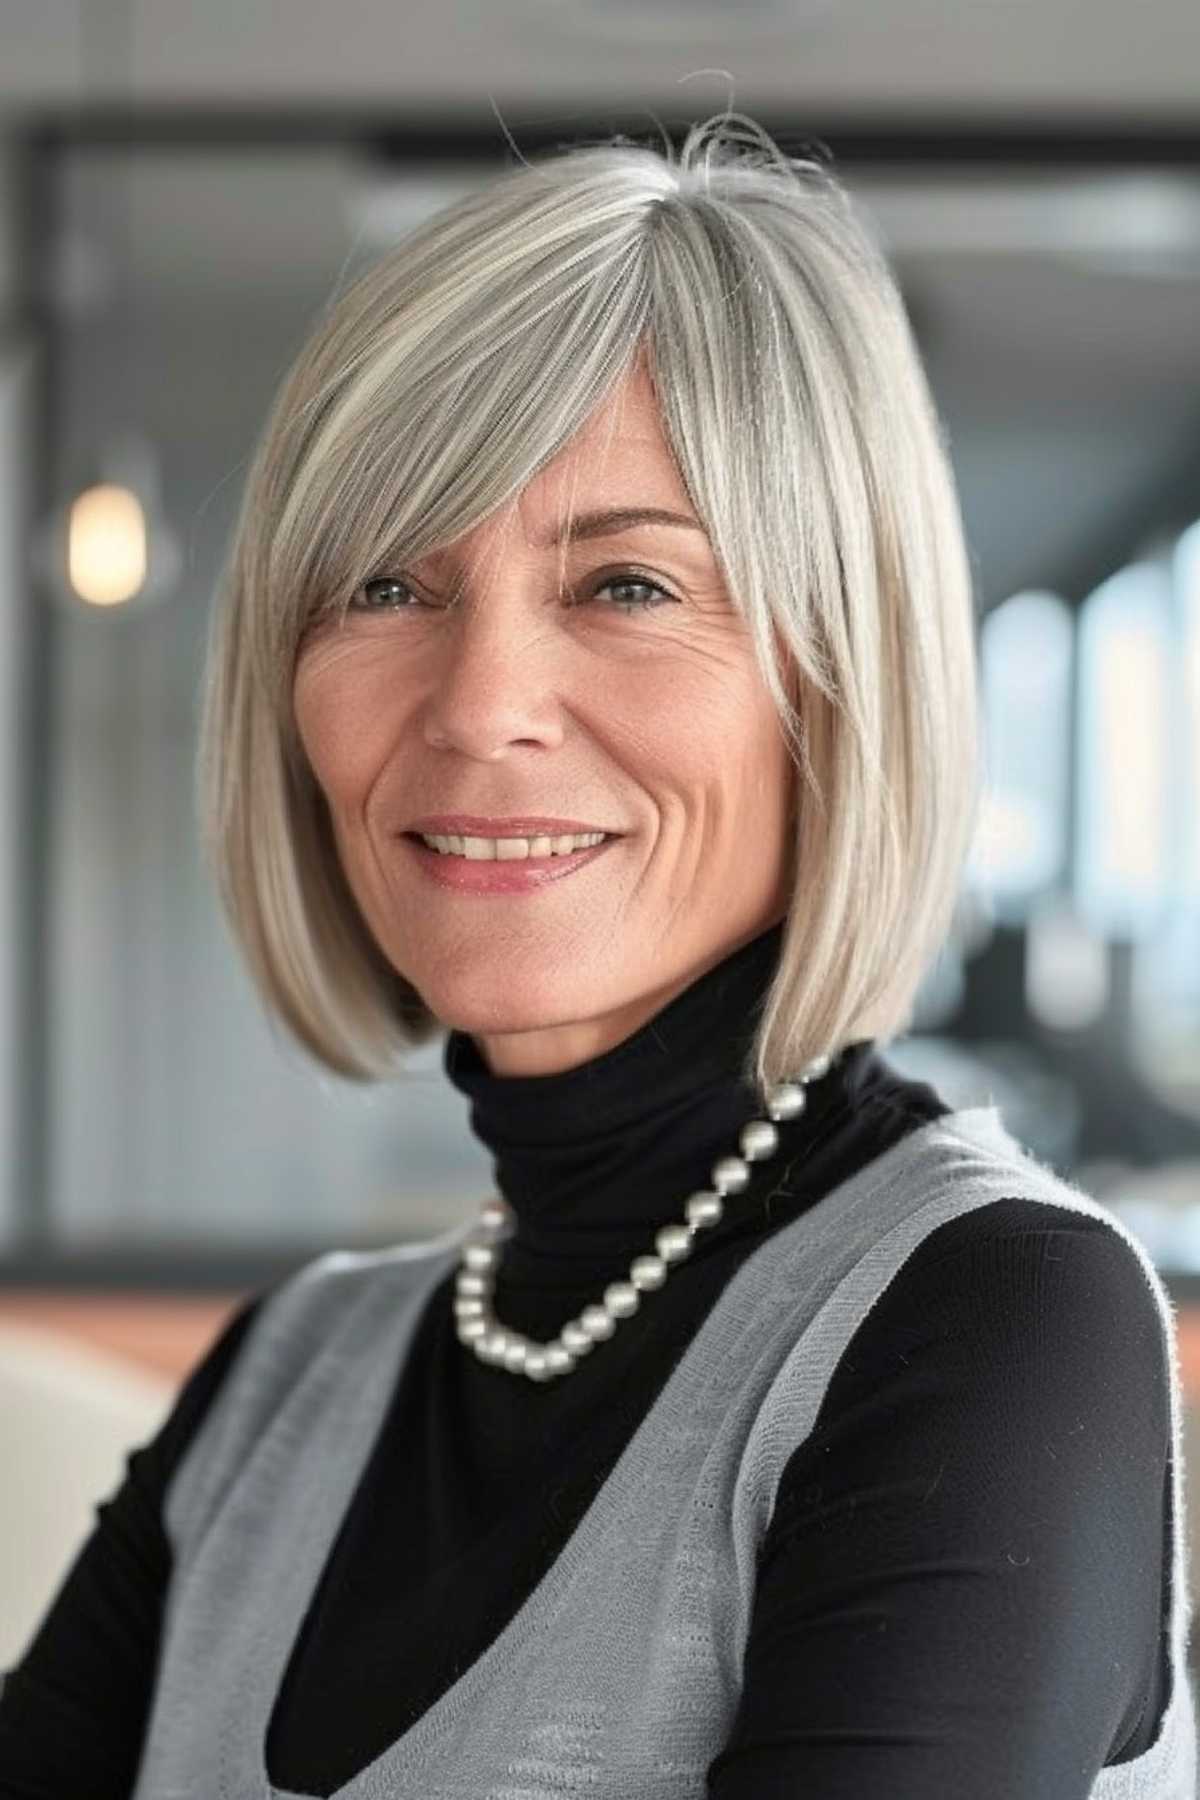 Mature woman sporting a stylish bob with side-swept bangs, dressed in a black and grey layered outfit with pearls. 